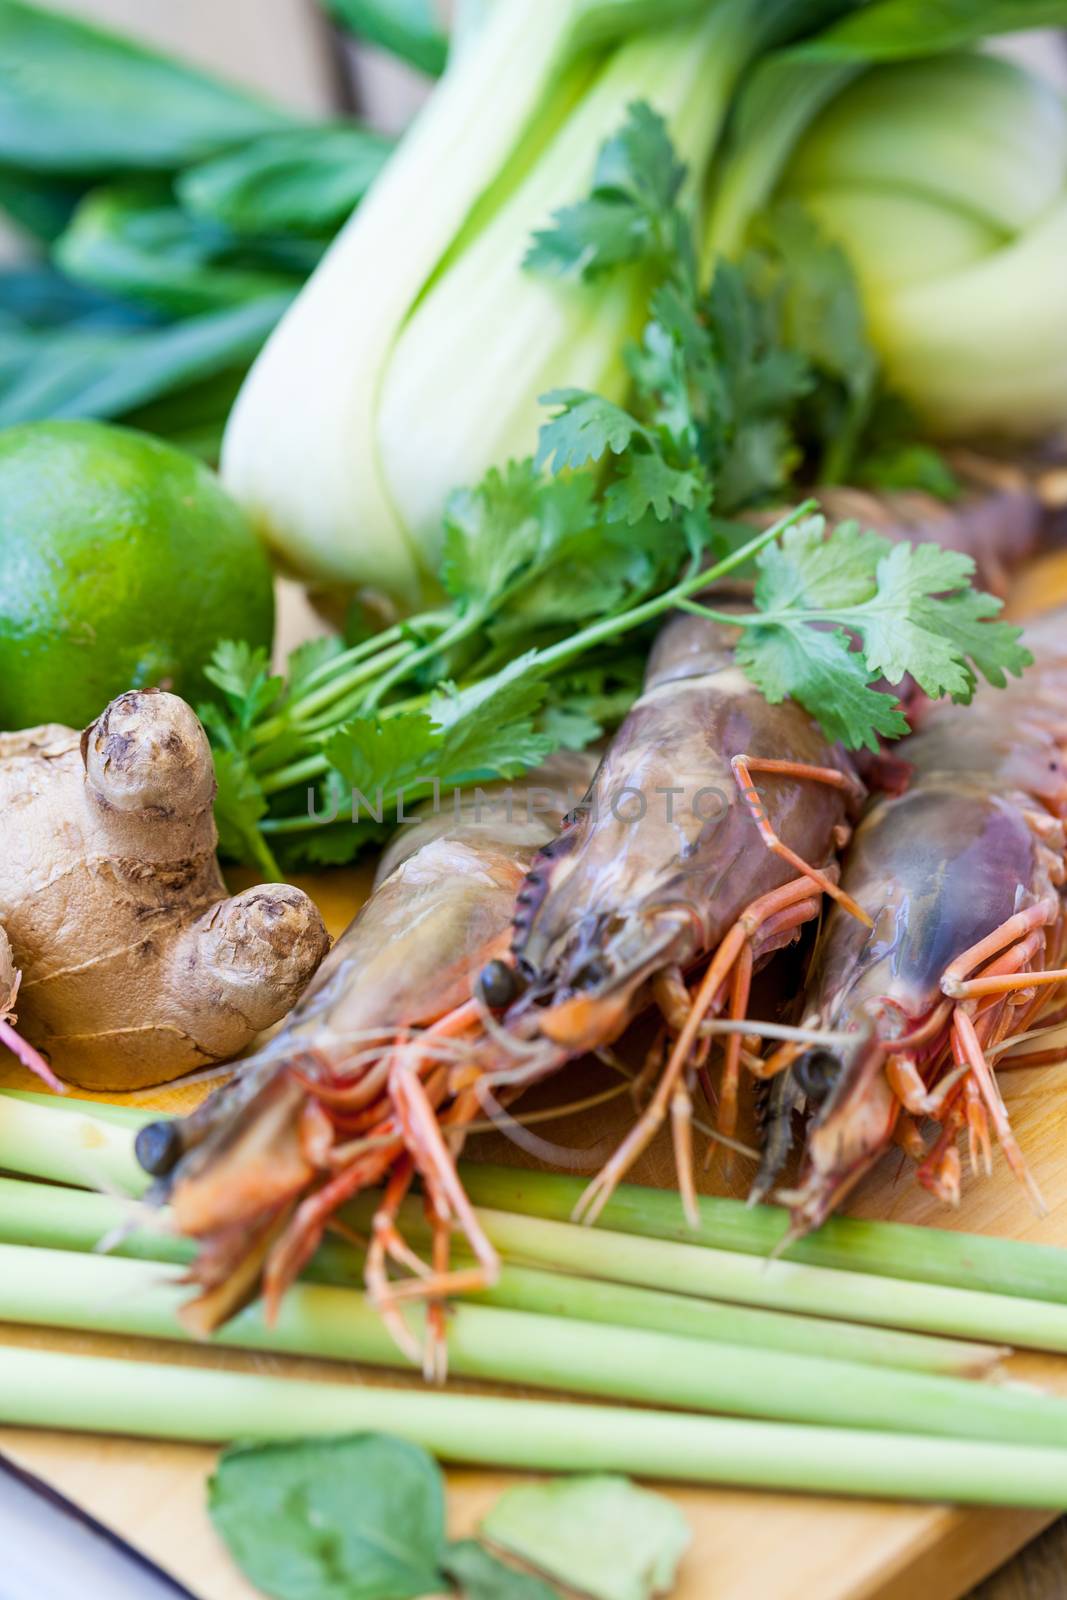 Ingredients for Thai tom yam soup by juniart